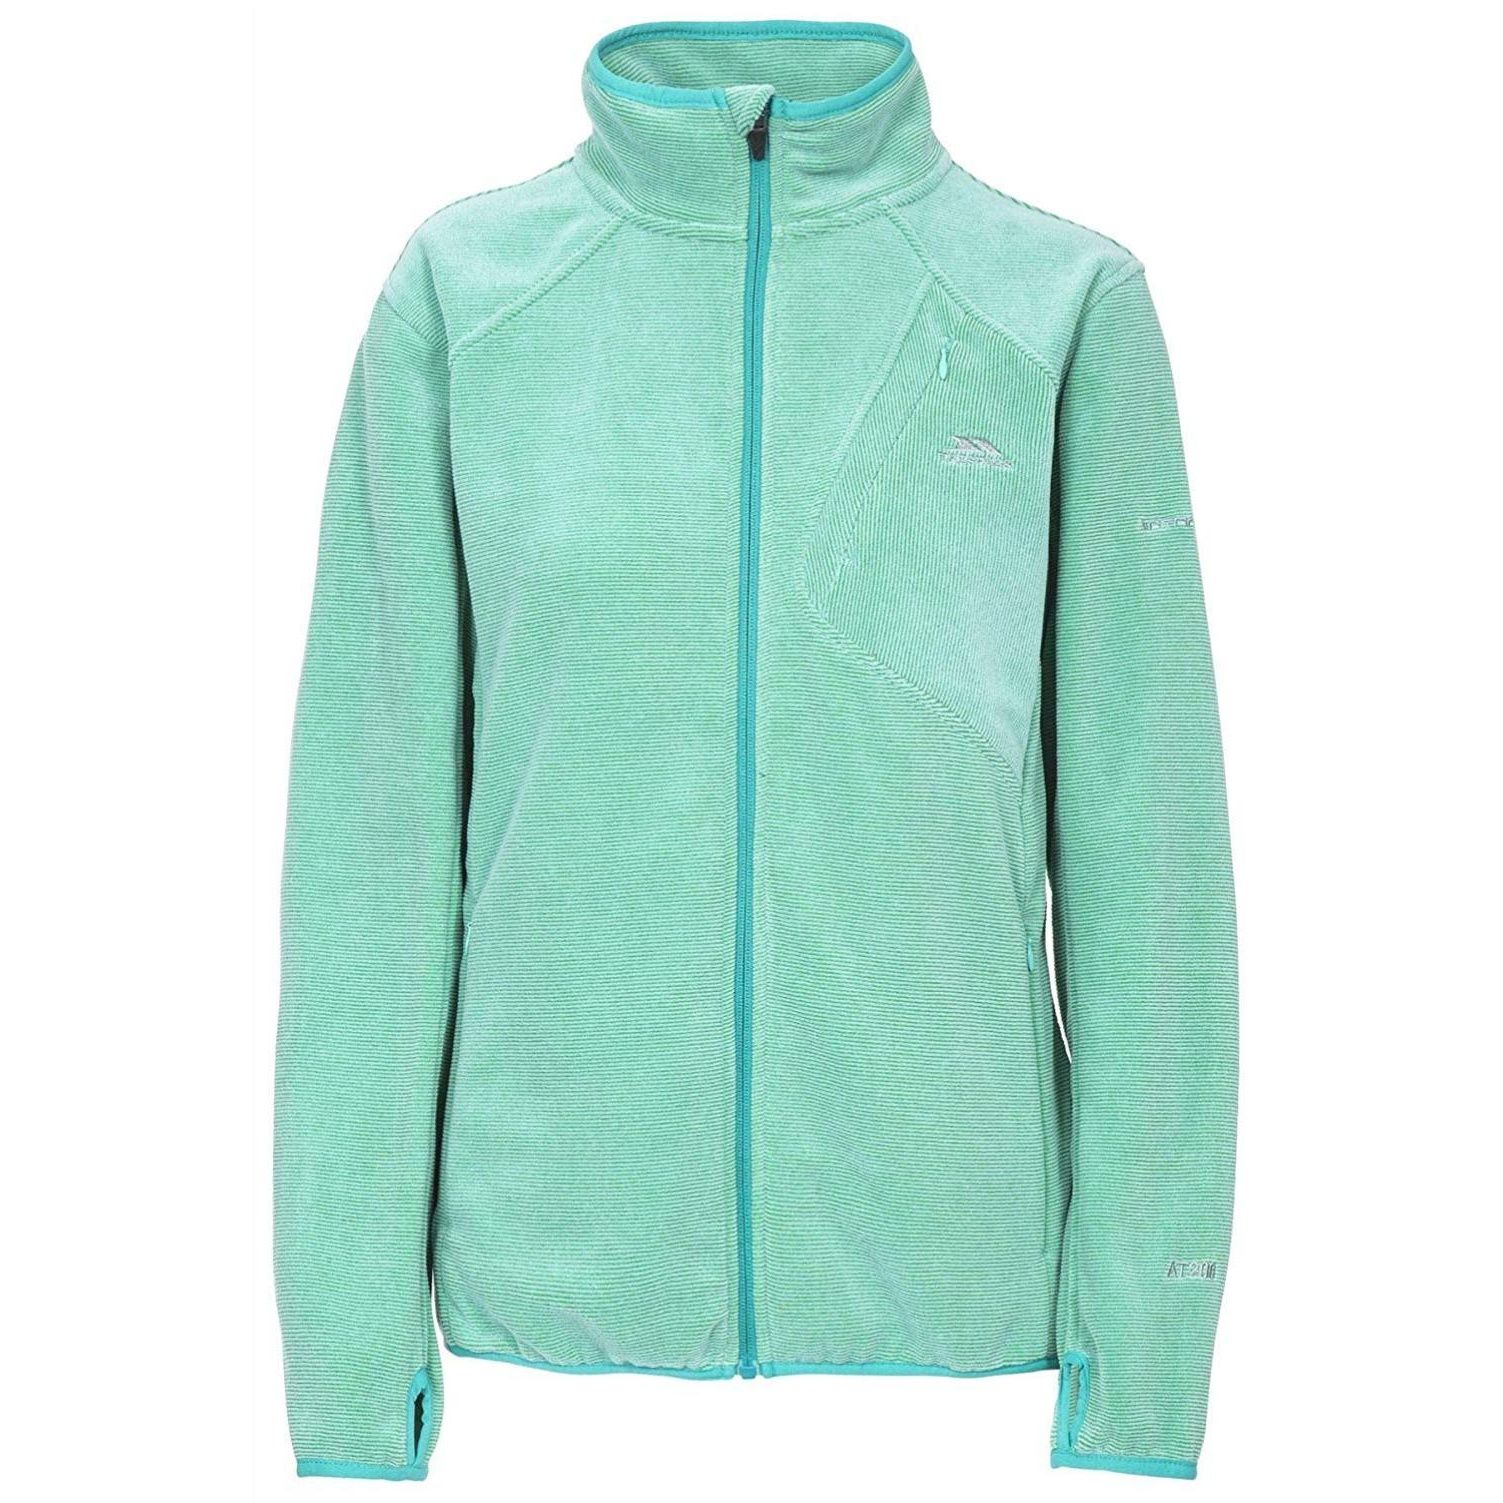 Womens fleece with insulated stripe rib. AirTrap fabric technology. Low profile full front zip. 1 x chest zip pocket. Thumb holes for further insulation. Ideal for wearing outside on a cold day. 100% Polyester.